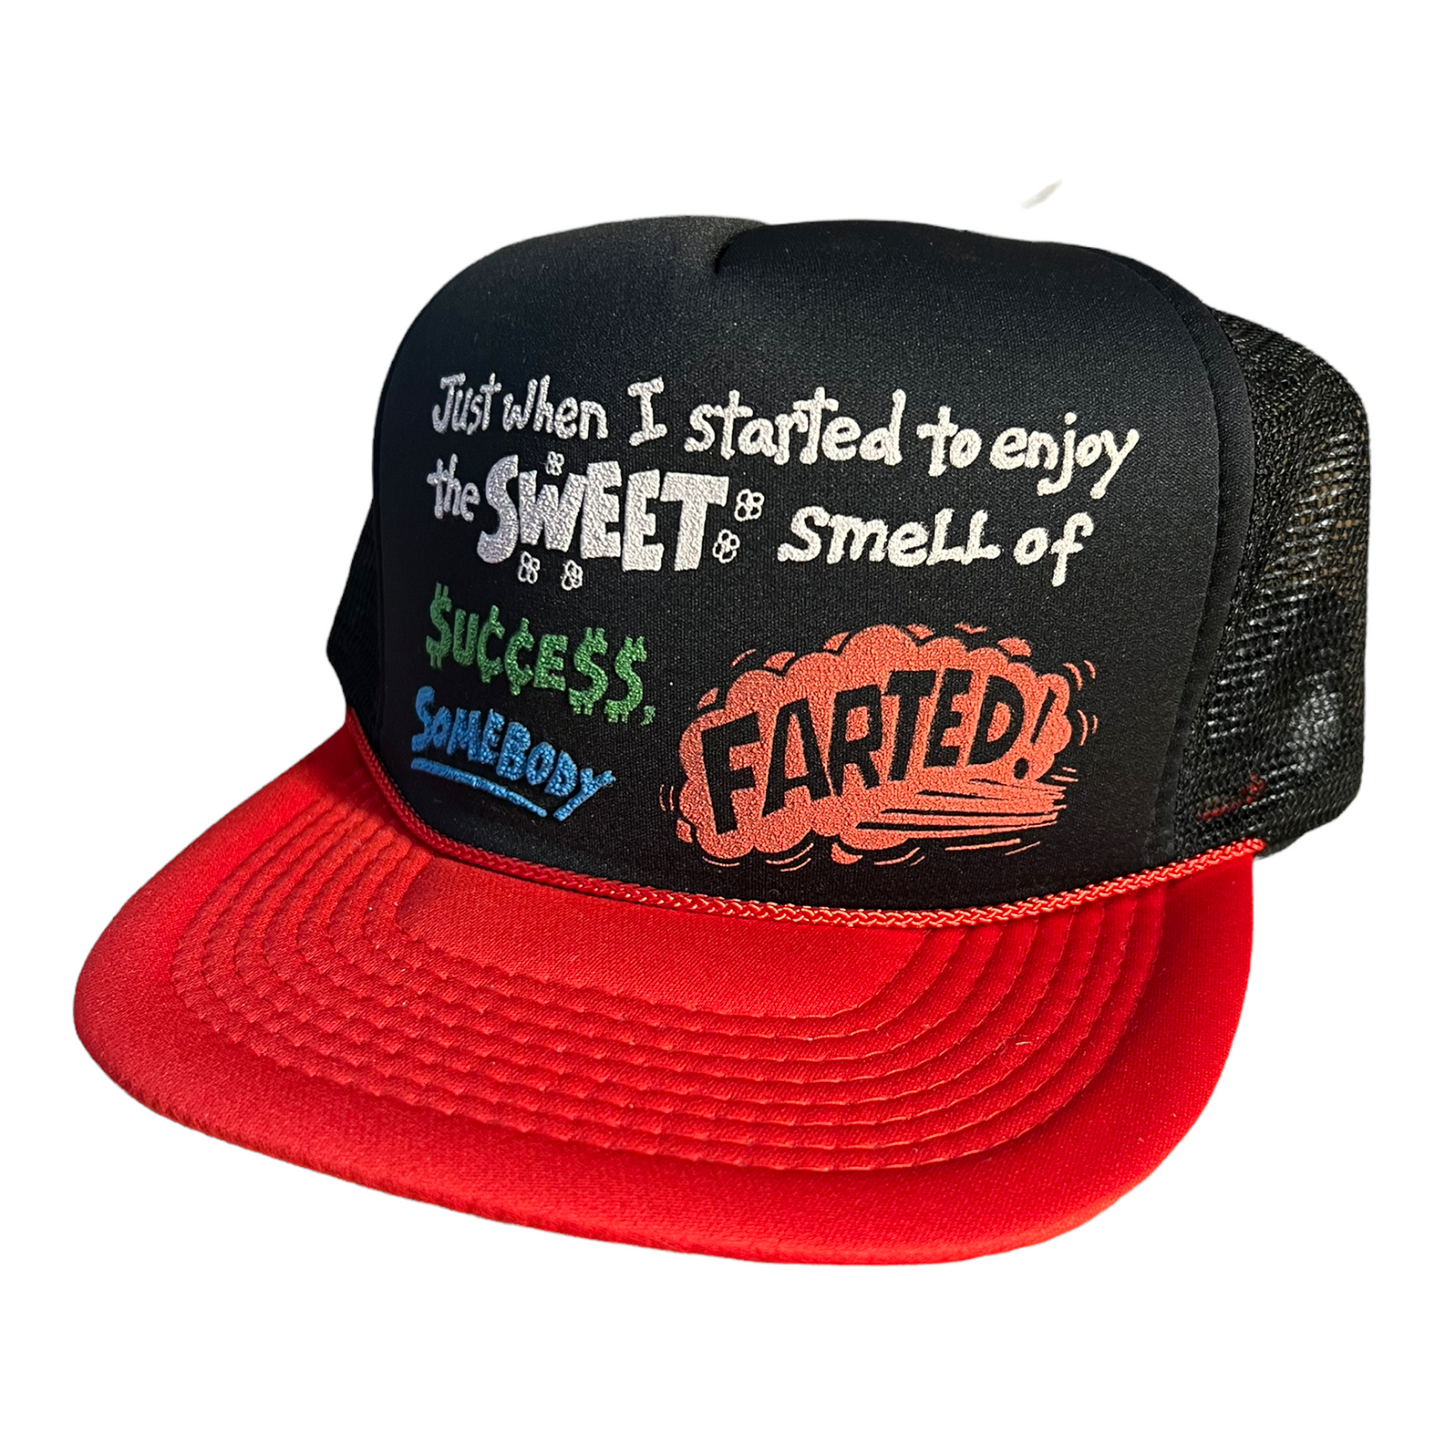 Vintage Just when I Started To Enjoy The Sweet Smell Of Success...Somebody Farted!Trucker Hat Funny Trucker Hat Black/White